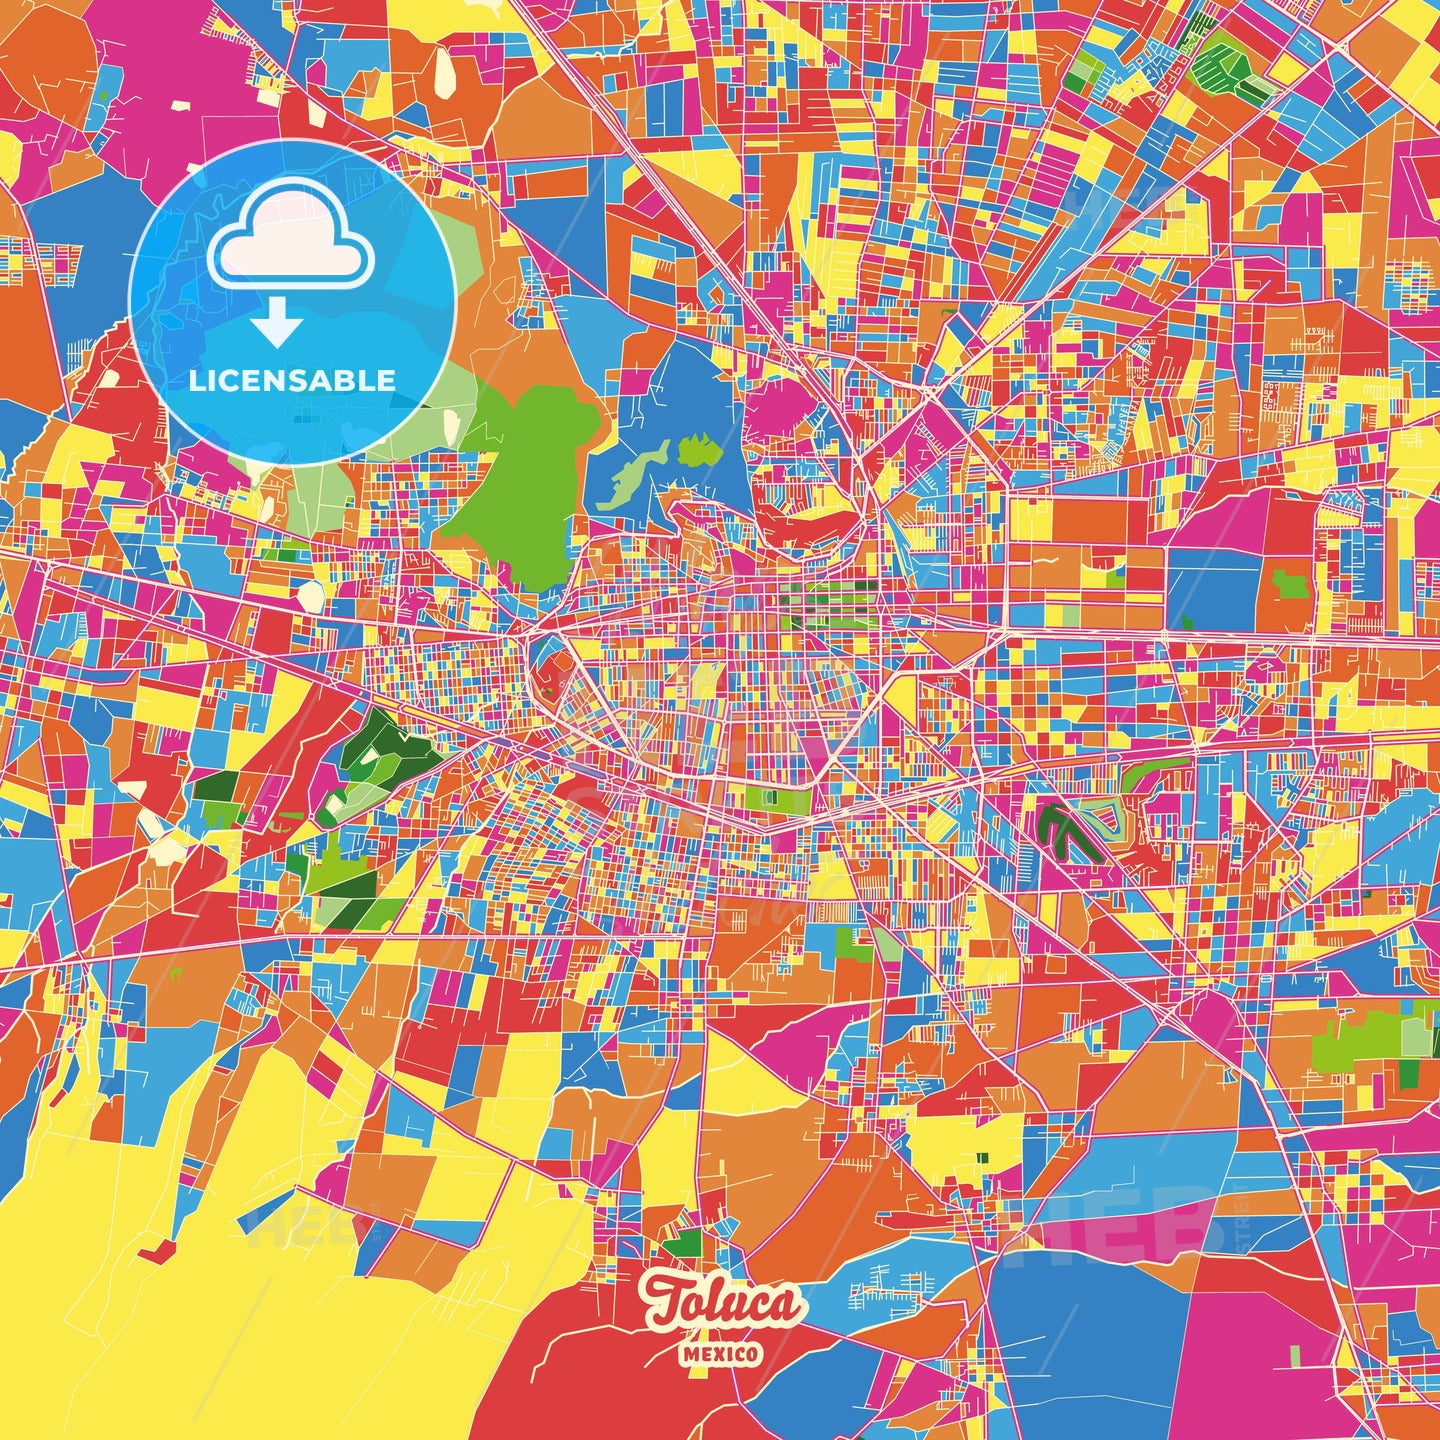 Toluca, Mexico Crazy Colorful Street Map Poster Template - HEBSTREITS Sketches